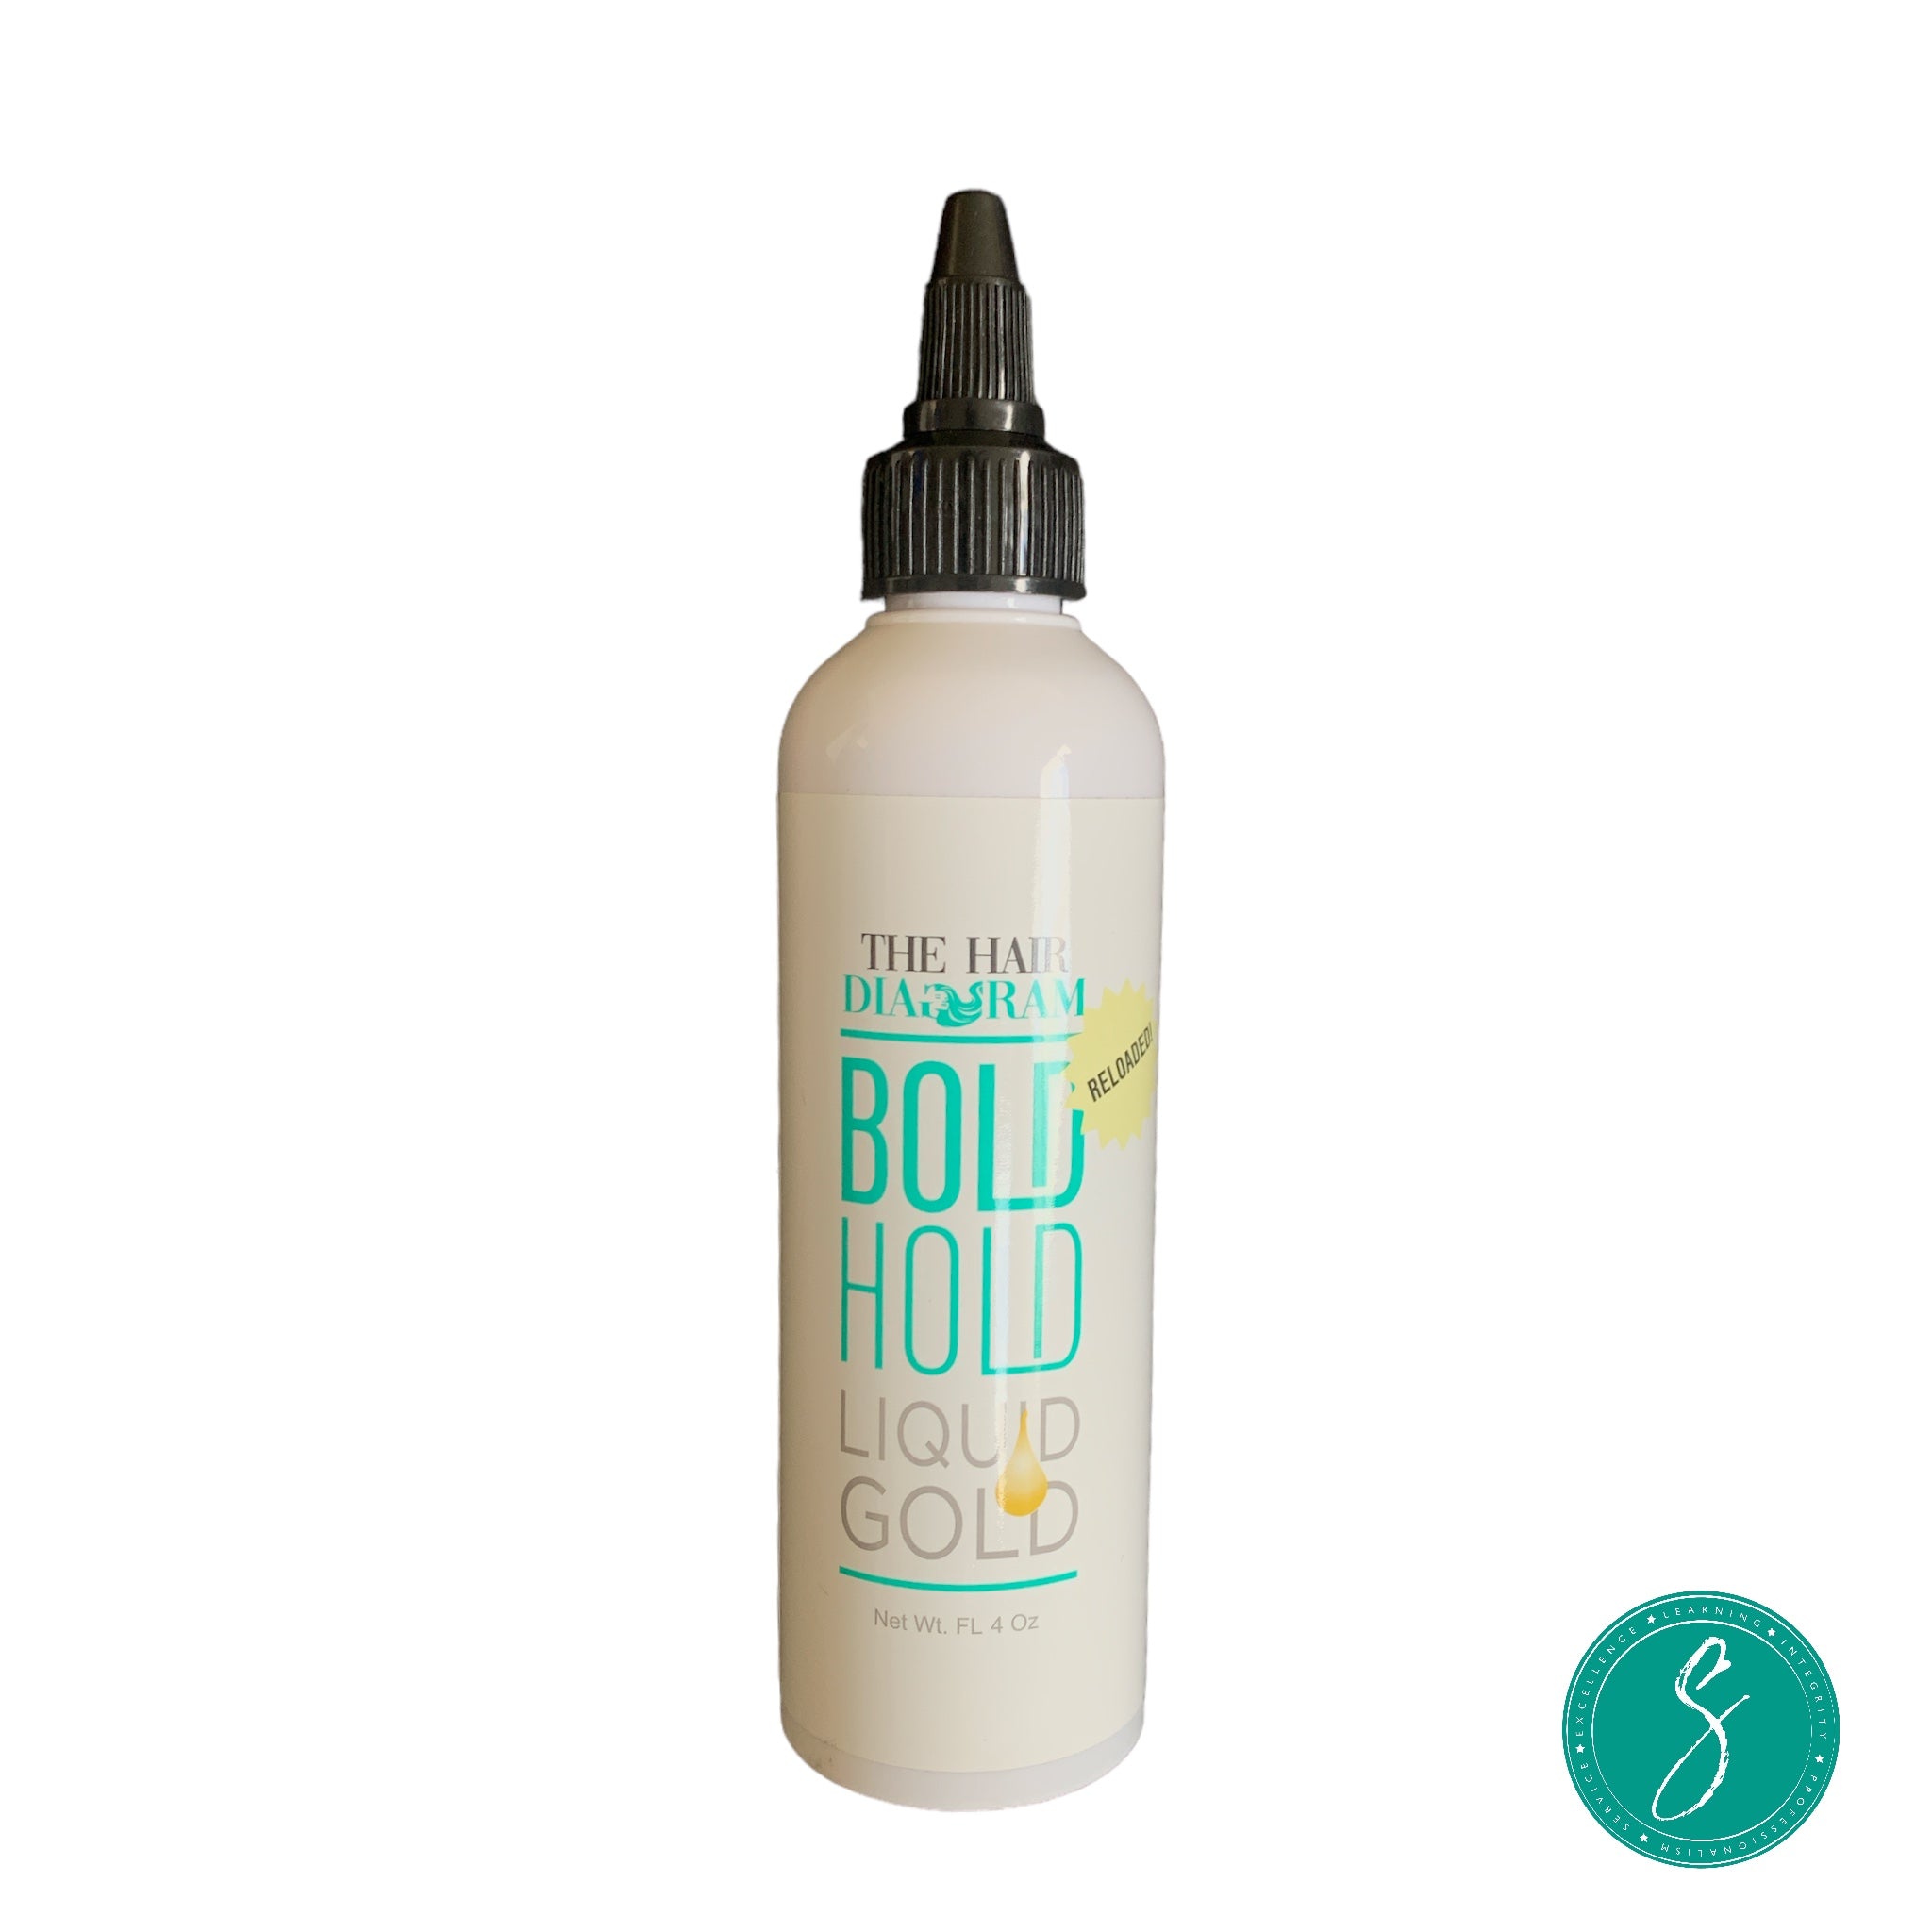 Bold Hold Liquid Gold Reloaded